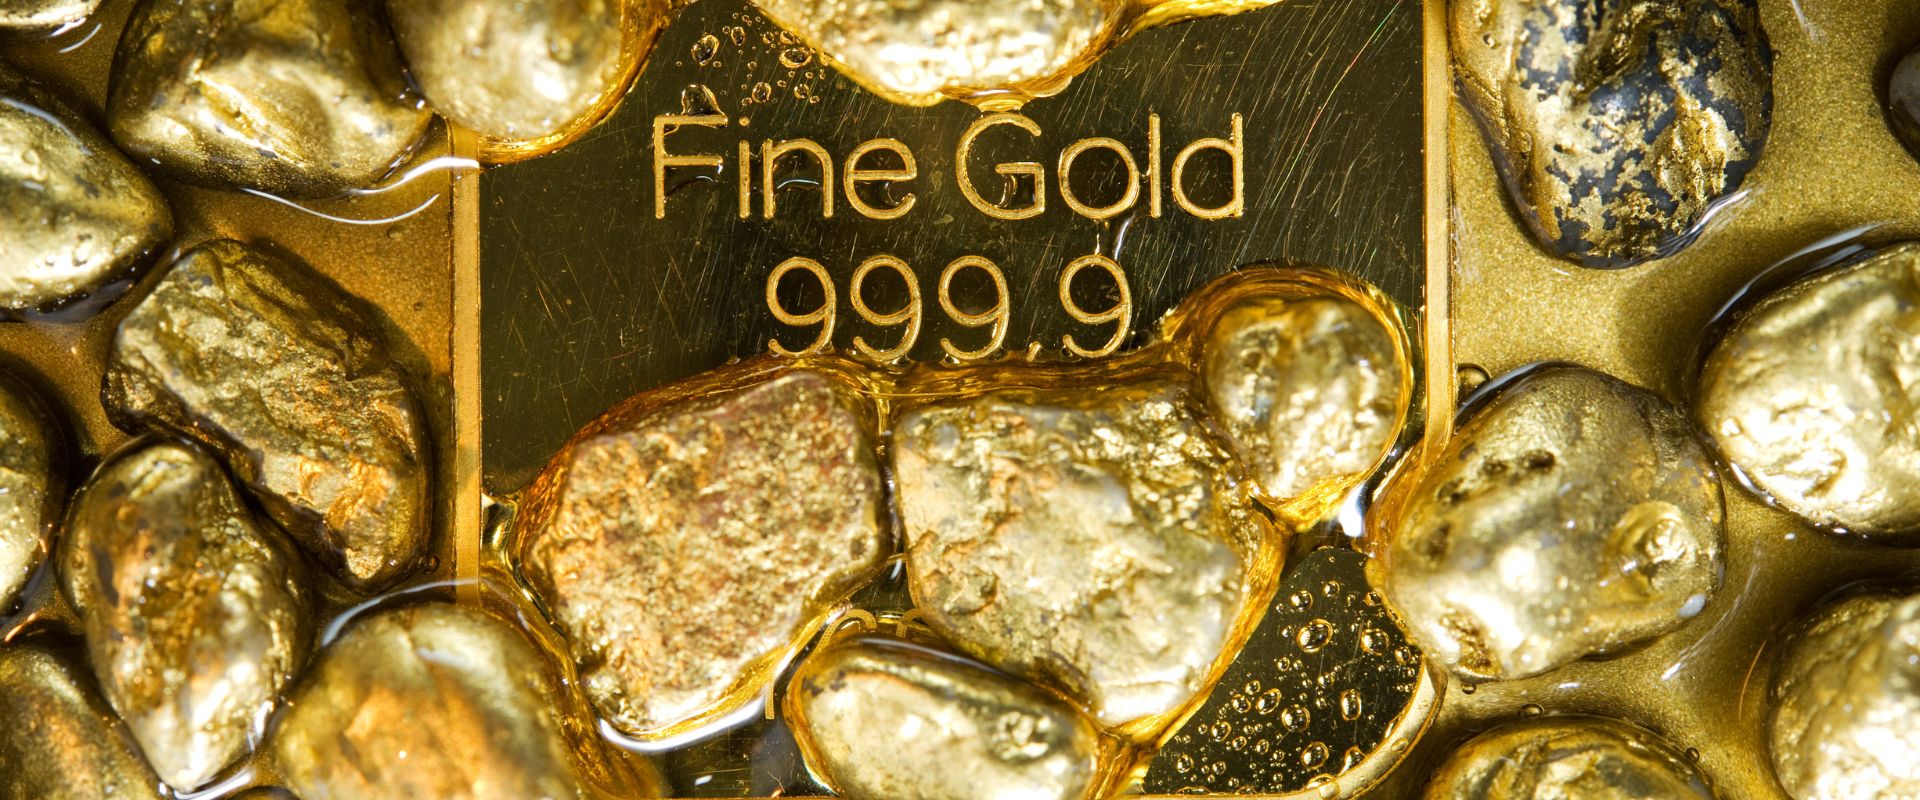 ten ounces pure gold bar and gold nuggets